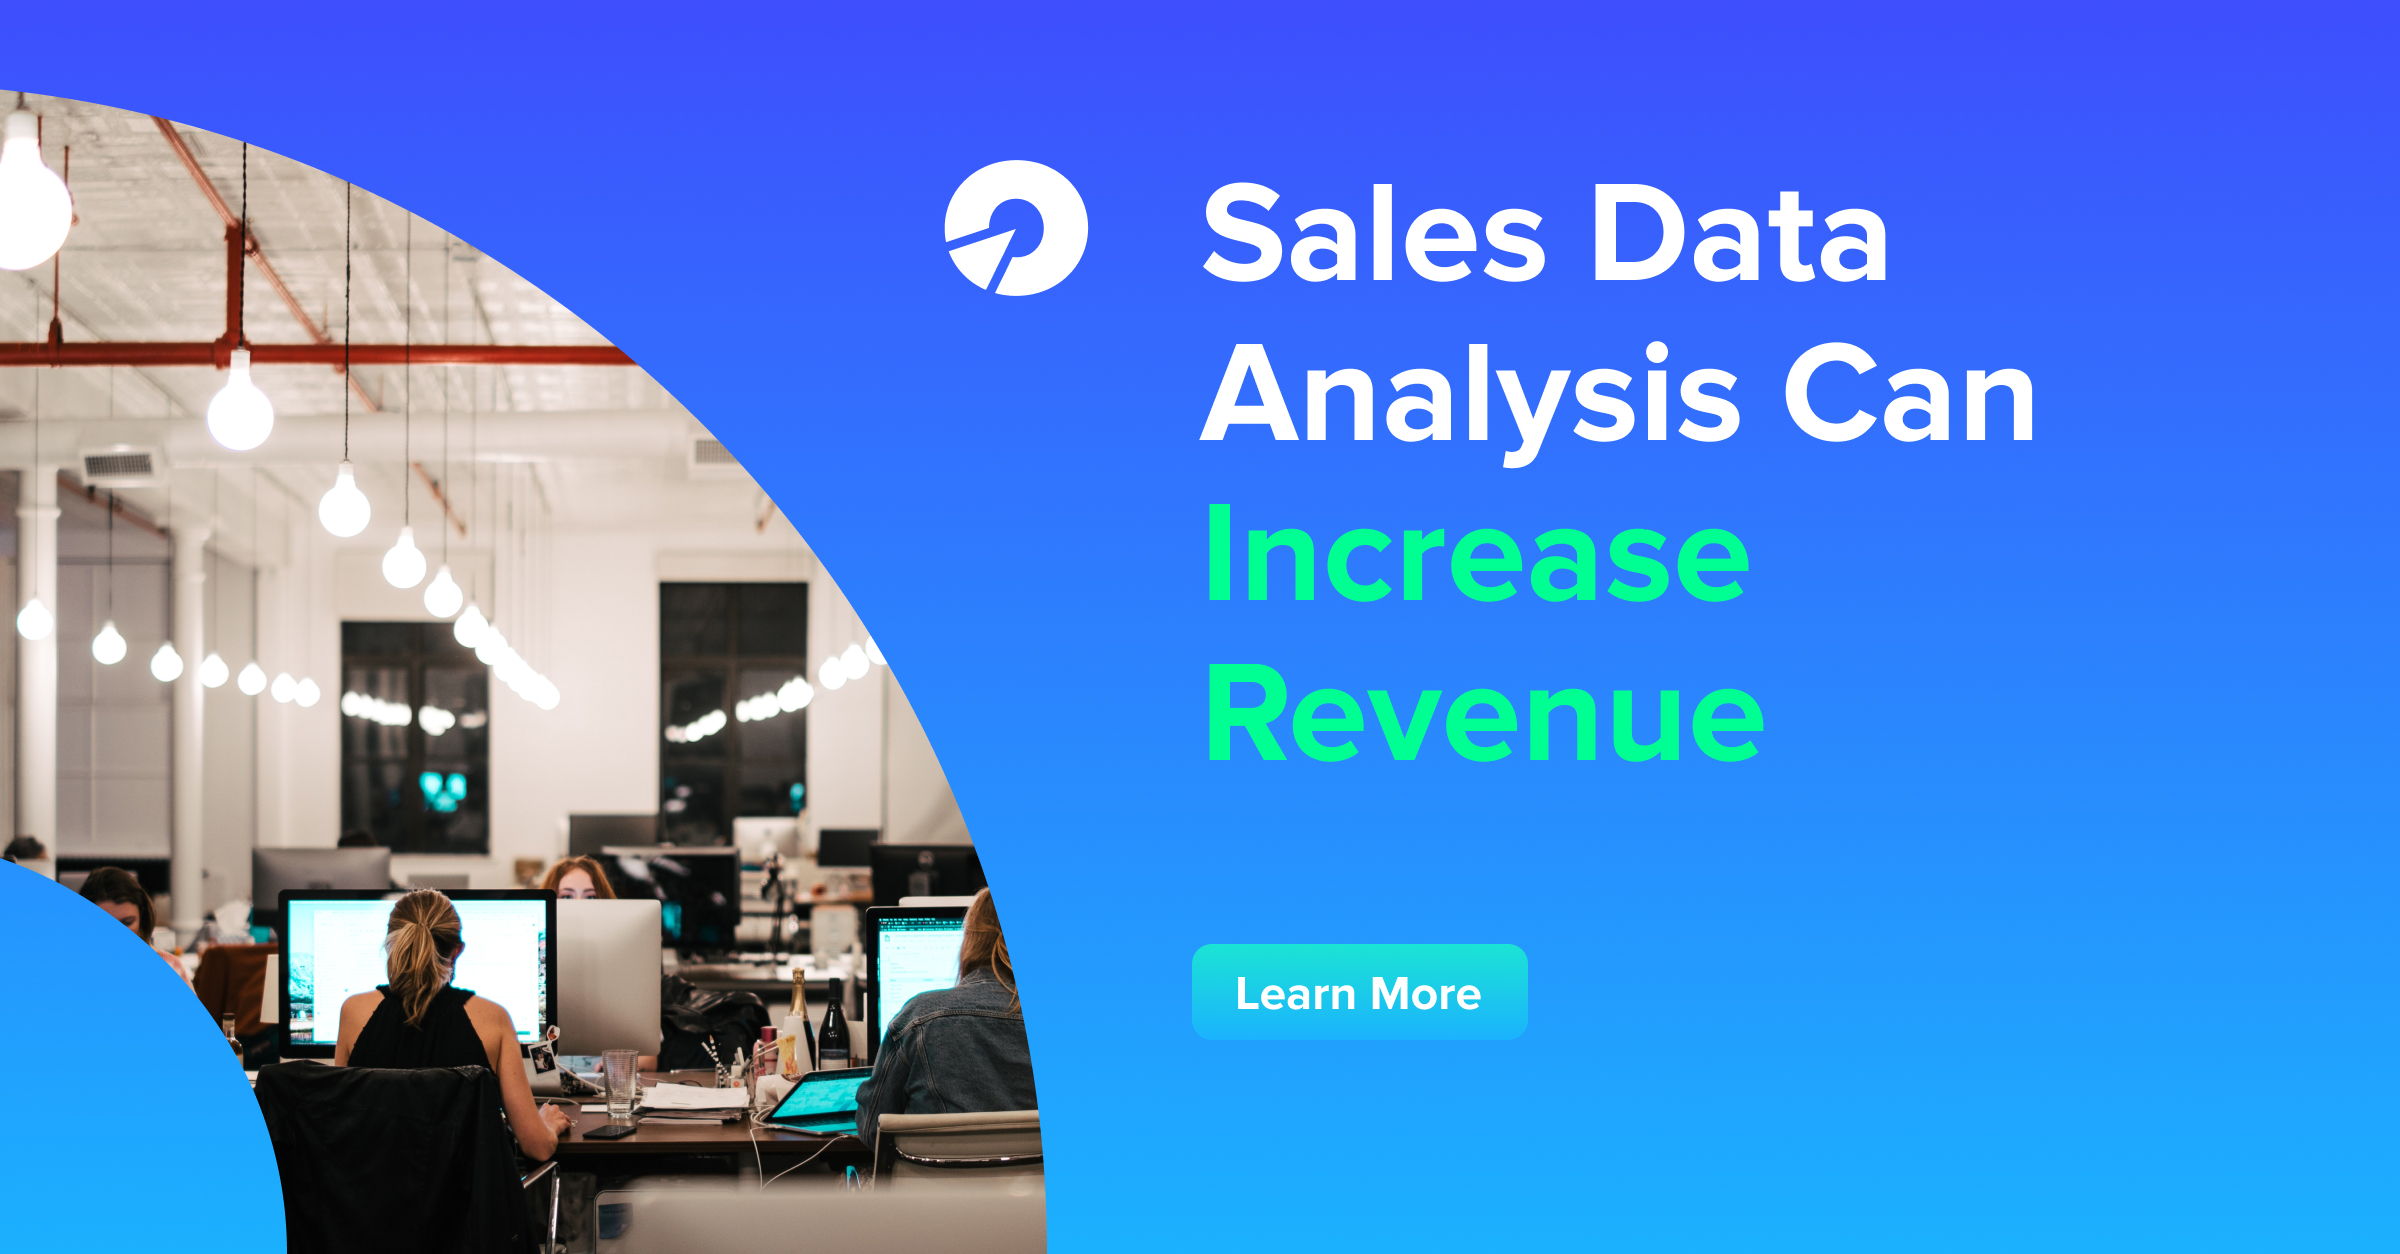 Sales Data Analysis Can Increase Revenue